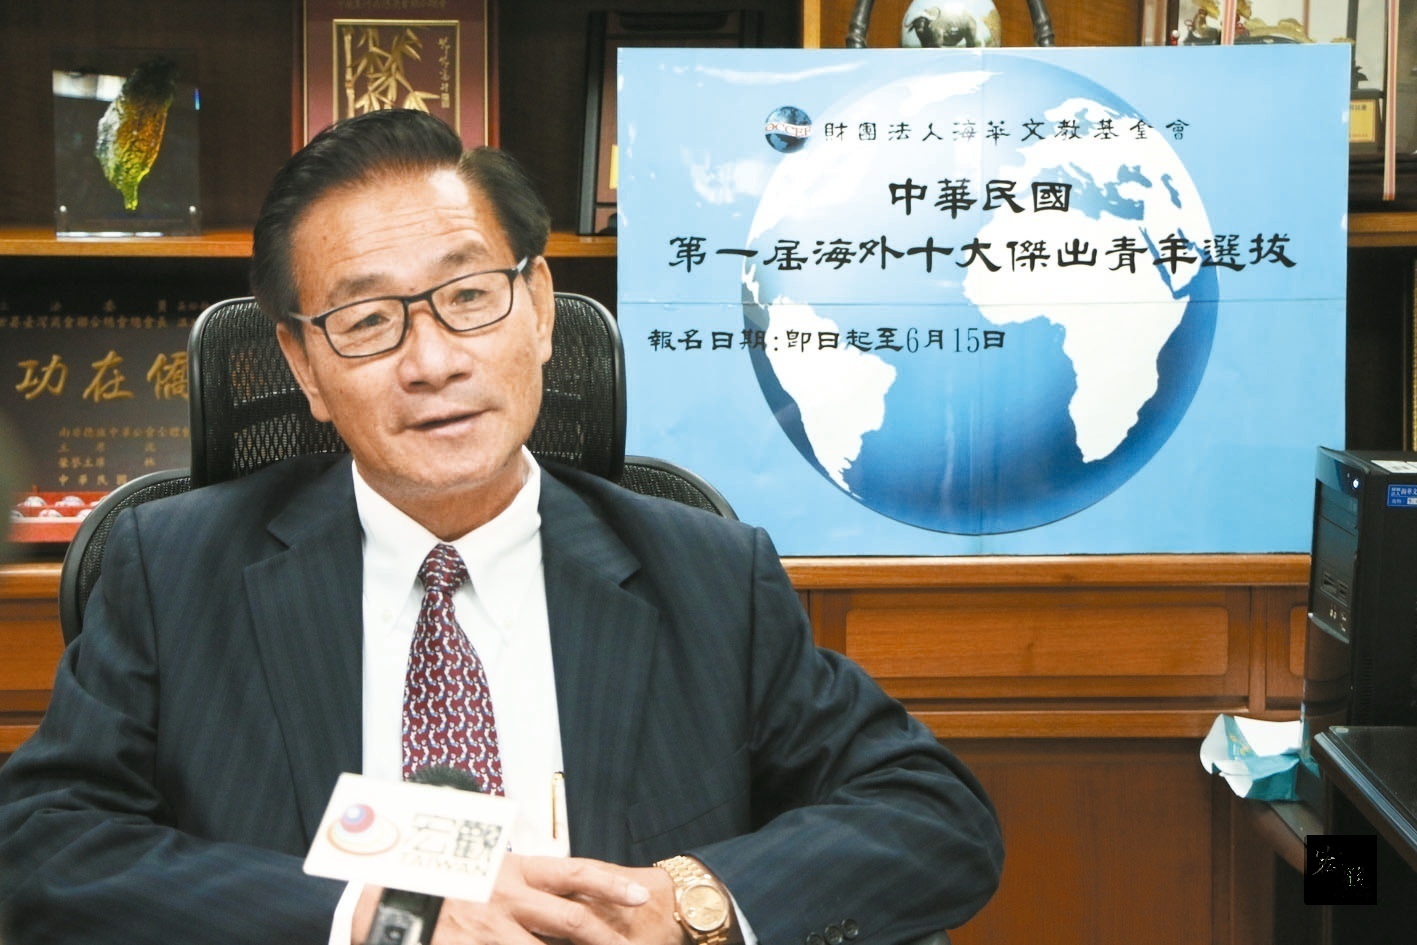 Chairman of the OCCEF Sung-pei Wu promoted the 1st Ten Outstanding Overseas Chinese Youths Selection in an interview with Macroview Weekly on May 4.財團法人海華文教基金會董事長吳松柏（圖）4日接受宏觀媒體專訪，推廣第一屆海外十大傑出青年選拔活動。